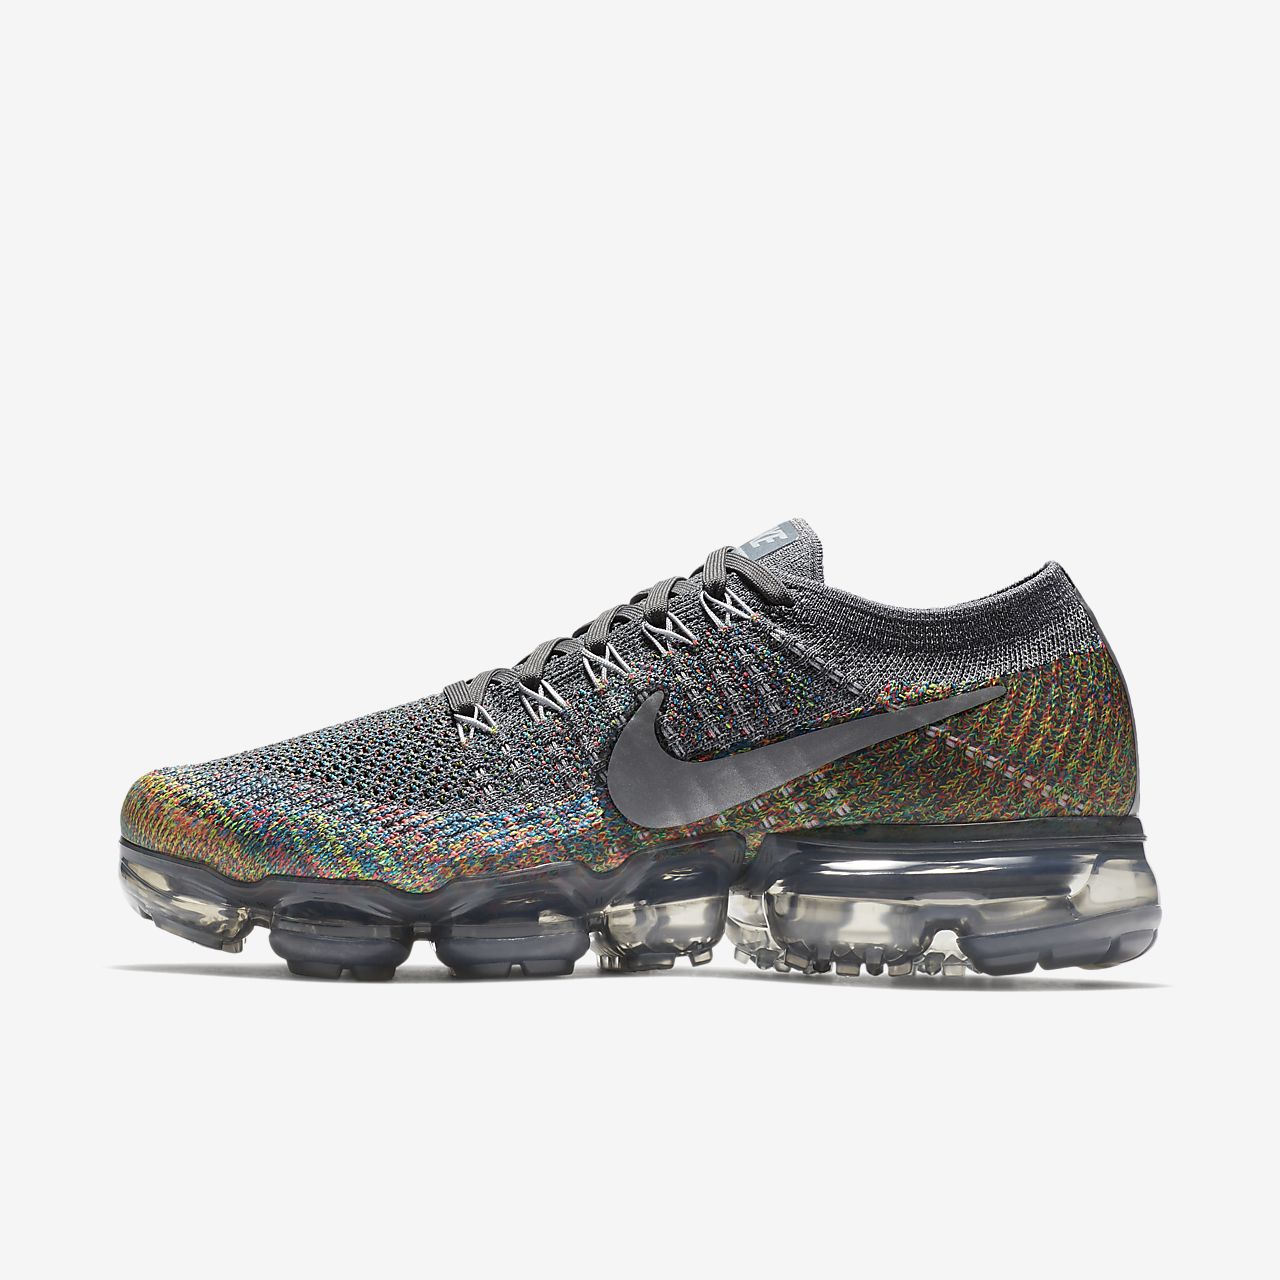 Acquista nike air vapormax flyknit donna scontate - OFF55% sconti